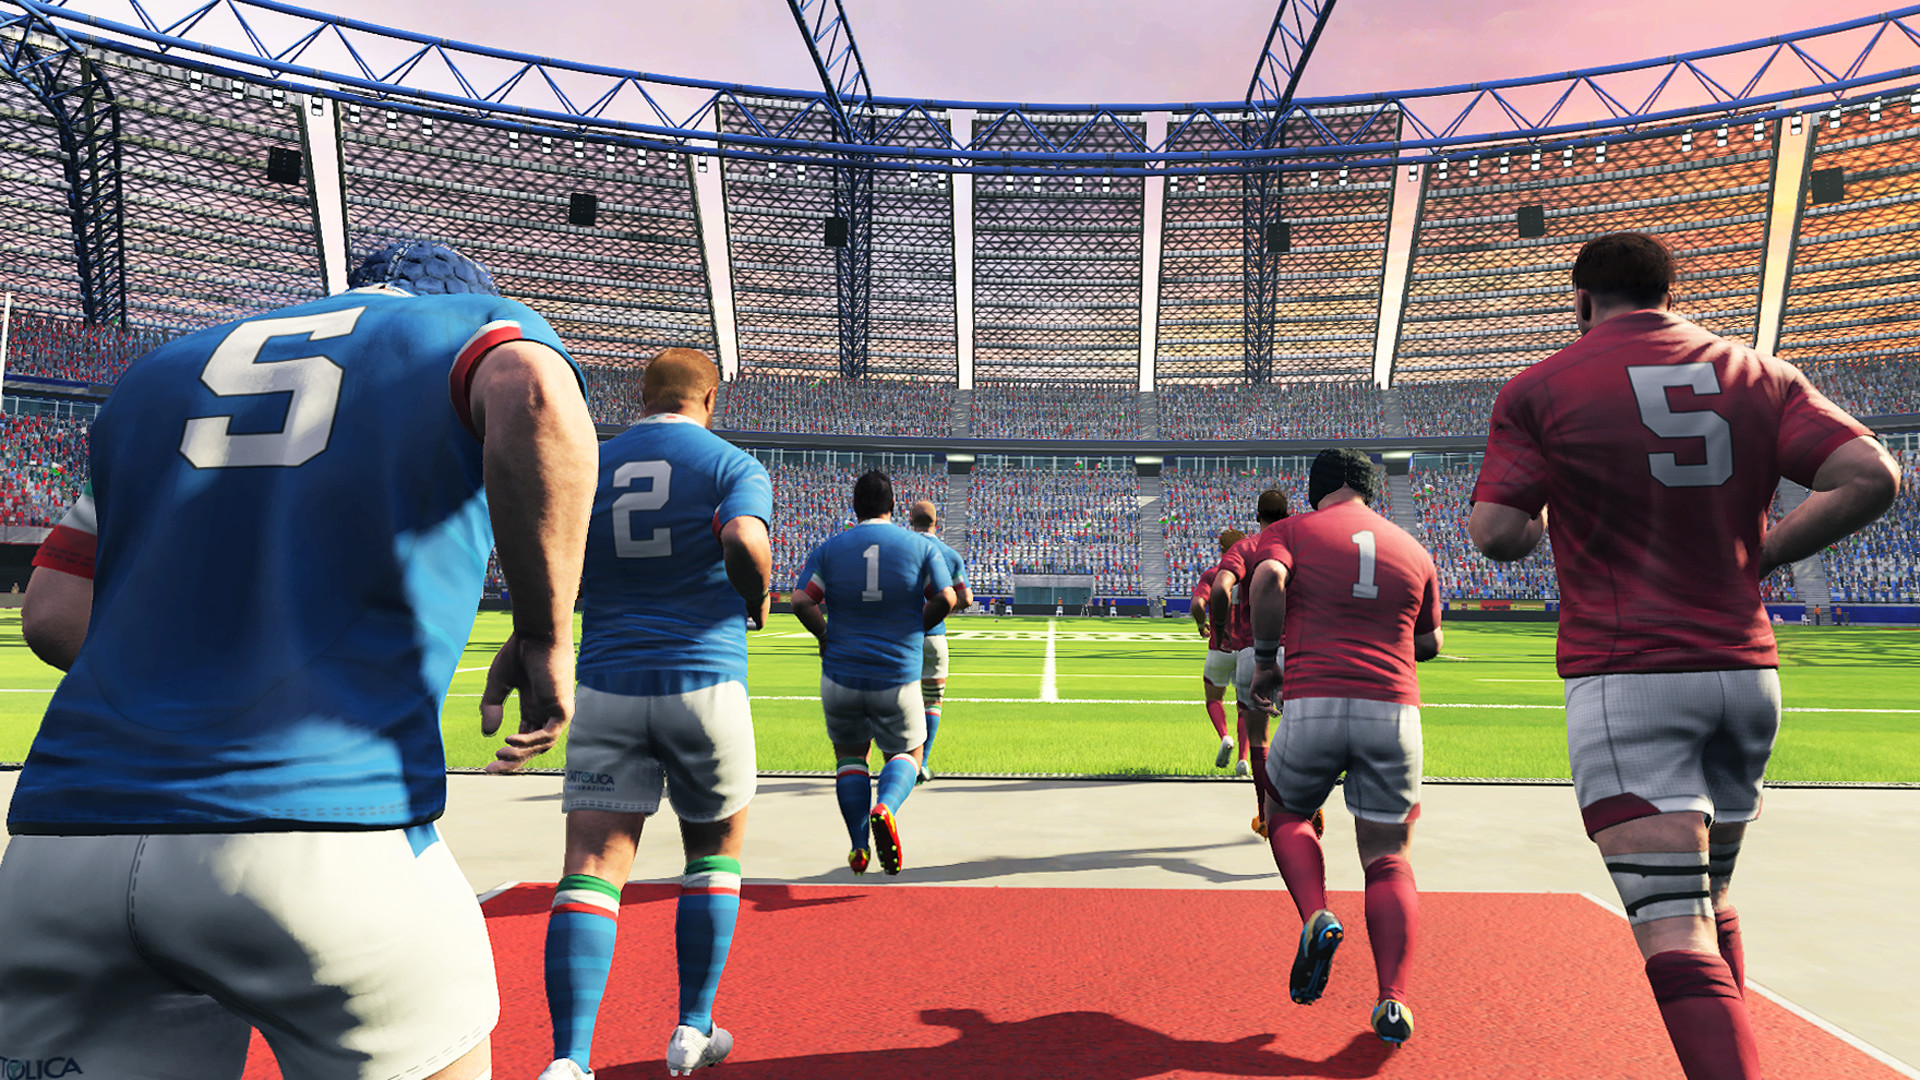 RUGBY 20 Free Download